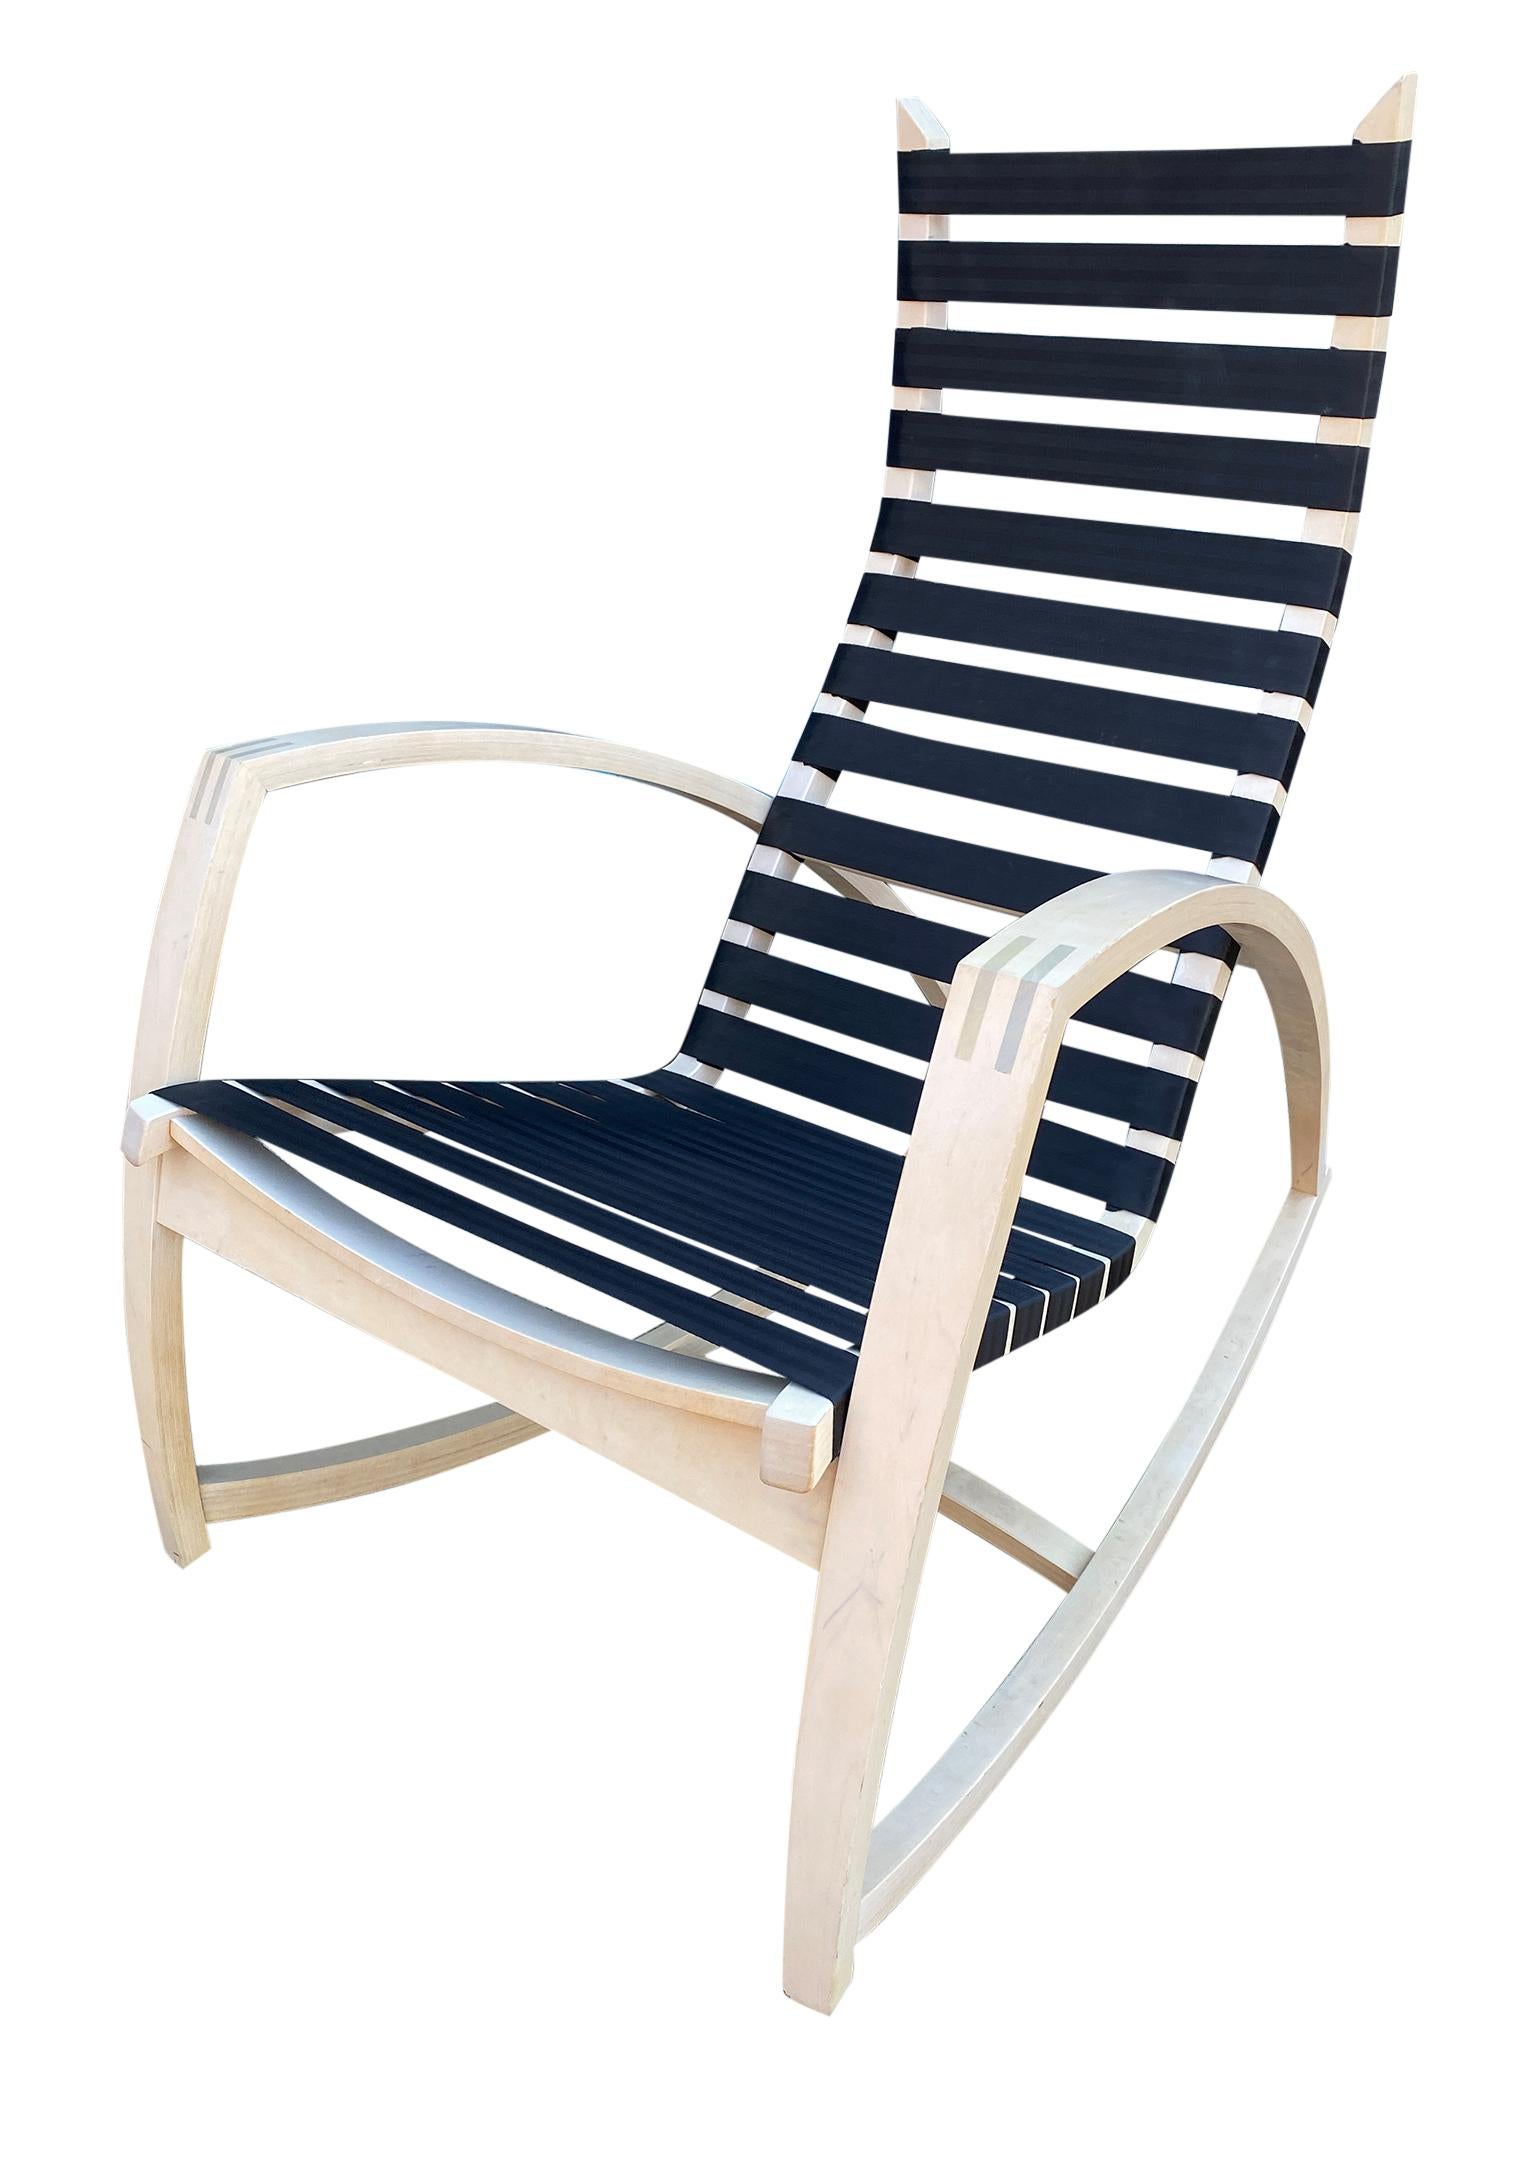 Peter Danko Design Gotham Rocking chair modern. Bent Birch wood - white washed with black Nylon straps. Excellent condition very rare and comfortable. Sold by J. Persing - Documented.